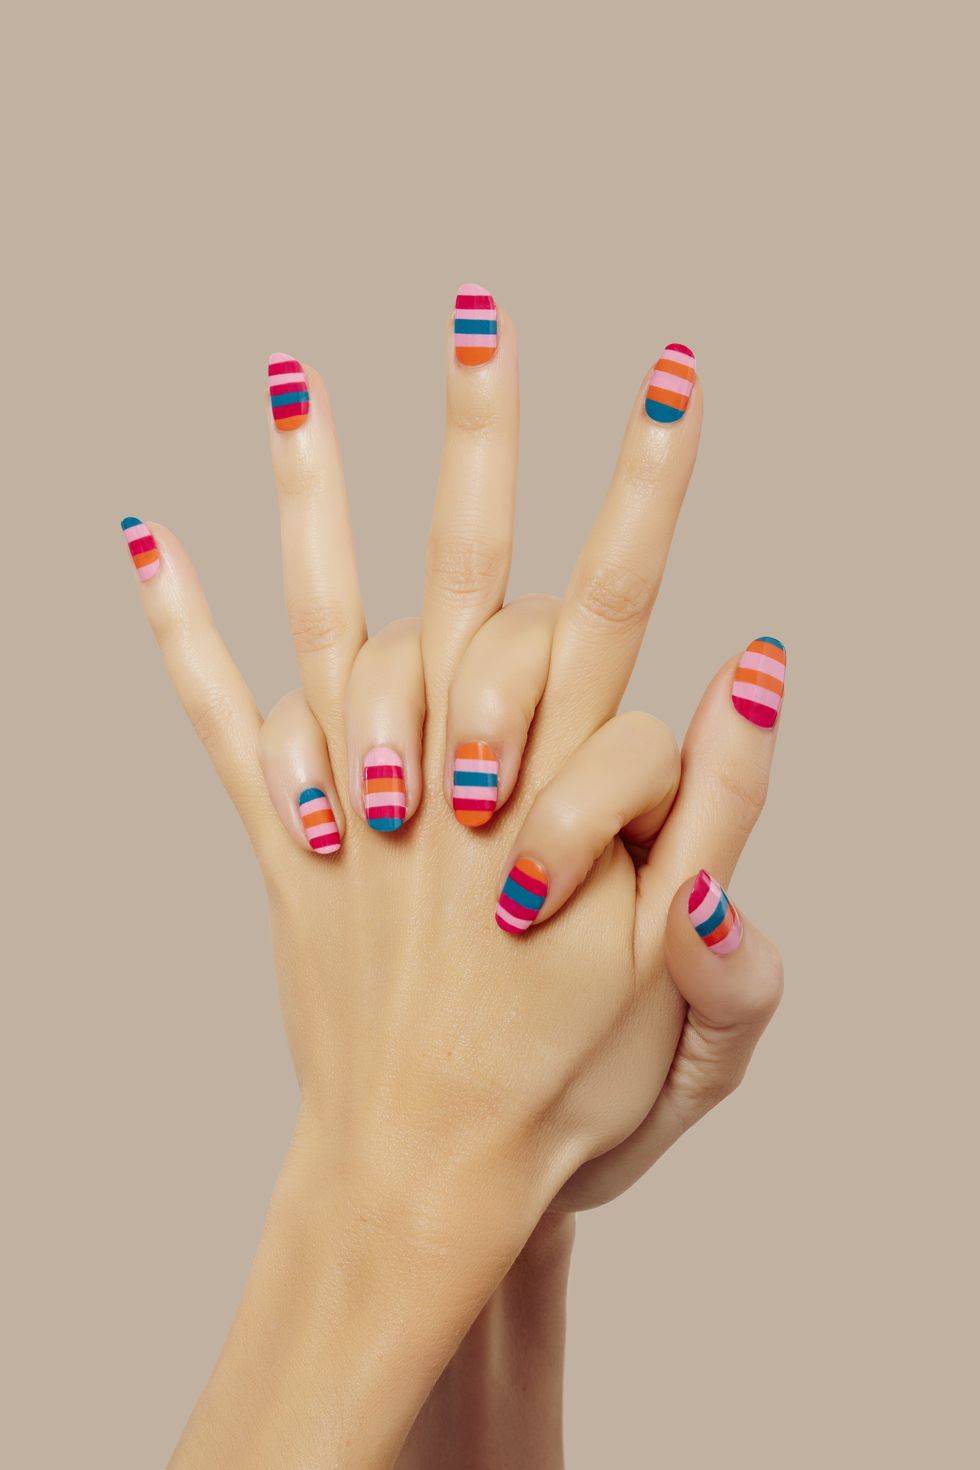 <p>Rainbow stripes are a no-brainer for&nbsp;summer, and&nbsp;Poole's&nbsp;taking note from the technicolor runways at&nbsp;Marc Jacobs,&nbsp;Fendi, and&nbsp;Altuzarra. "When painting your nails with a striped look, start with the most sheer and light color first," Poole recommended.&nbsp;For those who aren't about perfectly straight lines, Poole also suggested "choosing&nbsp;4 or 5 different shades from the 80's revival palette and layering them by using a <a href="http://shop.nordstrom.com/s/red-carpet-manicure-nail-art-tool-kit/4095155?cm_mmc=google-_-productads-_-Women%3APersonalCareAccessories%3ANailcare-_-1166856&amp;rkg_id=h-896a1c805784a495af950ea21c9956b9_t-1485187678&amp;adpos=1o1&amp;creative=57187616753&amp;device=c&amp;network=g&amp;gclid=COP07p_T2NECFVdXDQodjgsGvw" target="_blank" data-tracking-id="recirc-text-link">striping brush</a> to create&nbsp;[...]&nbsp;random order and coloration." The irregularity will give you a painterly finish and mask any mistakes, too.&nbsp;<span class="redactor-invisible-space" data-verified="redactor" data-redactor-tag="span" data-redactor-class="redactor-invisible-space"></span></p>